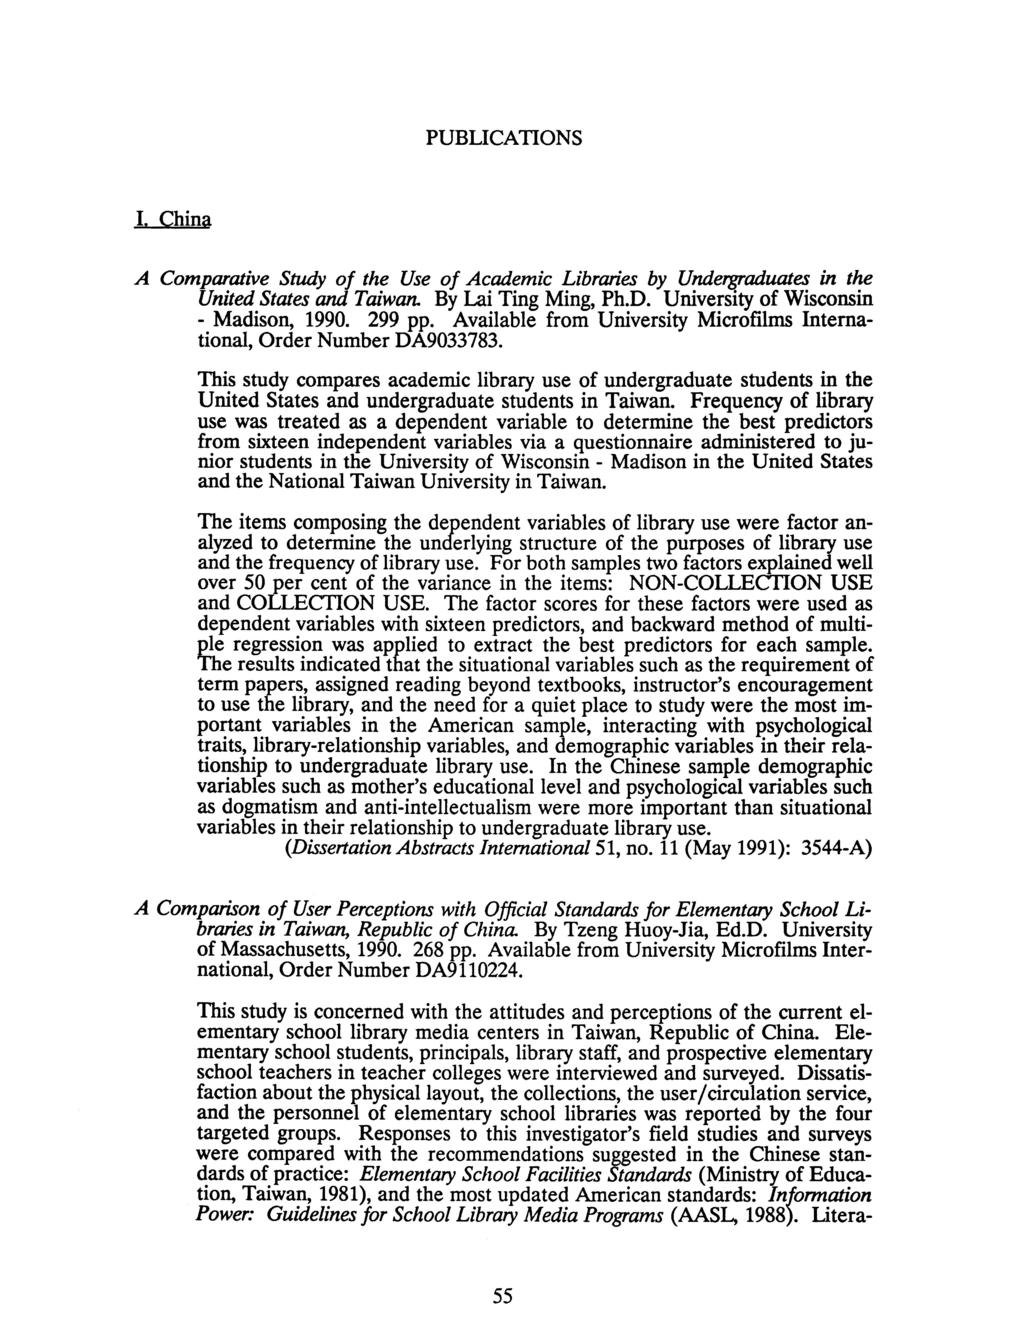 PUBLICATIONS I. China A Comparative Study of the Use of Academic Libraries by Undergraduates in the United States and Taiwan. By Lai Ting Ming, Ph.D. University of Wisconsin - Madison, 1990. 299 pp.